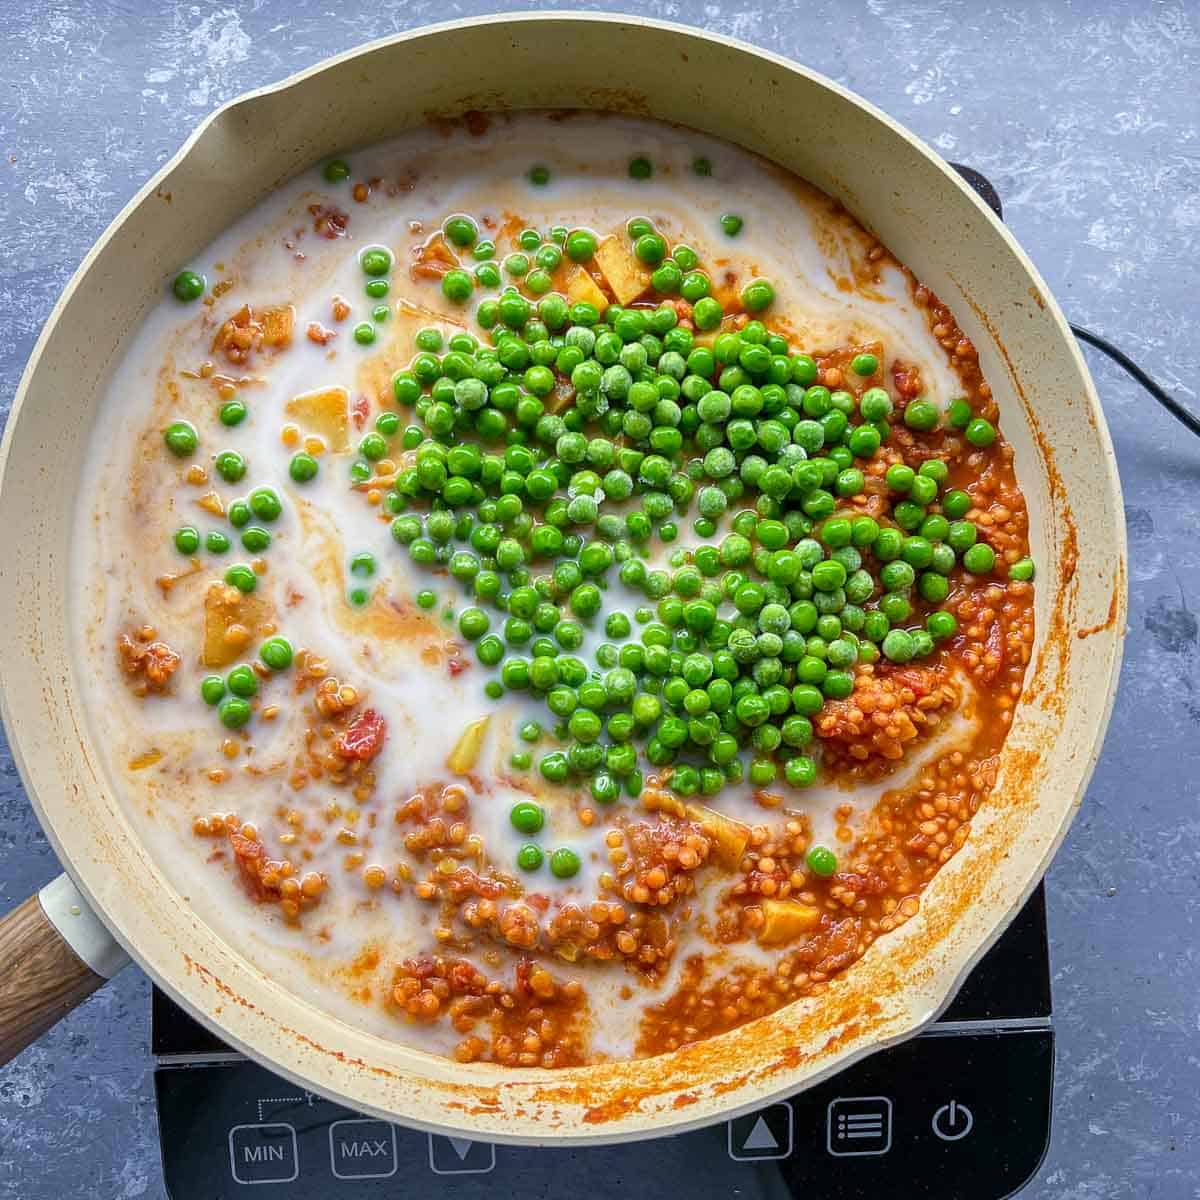 Coconut milk and peas added to the frying pan.